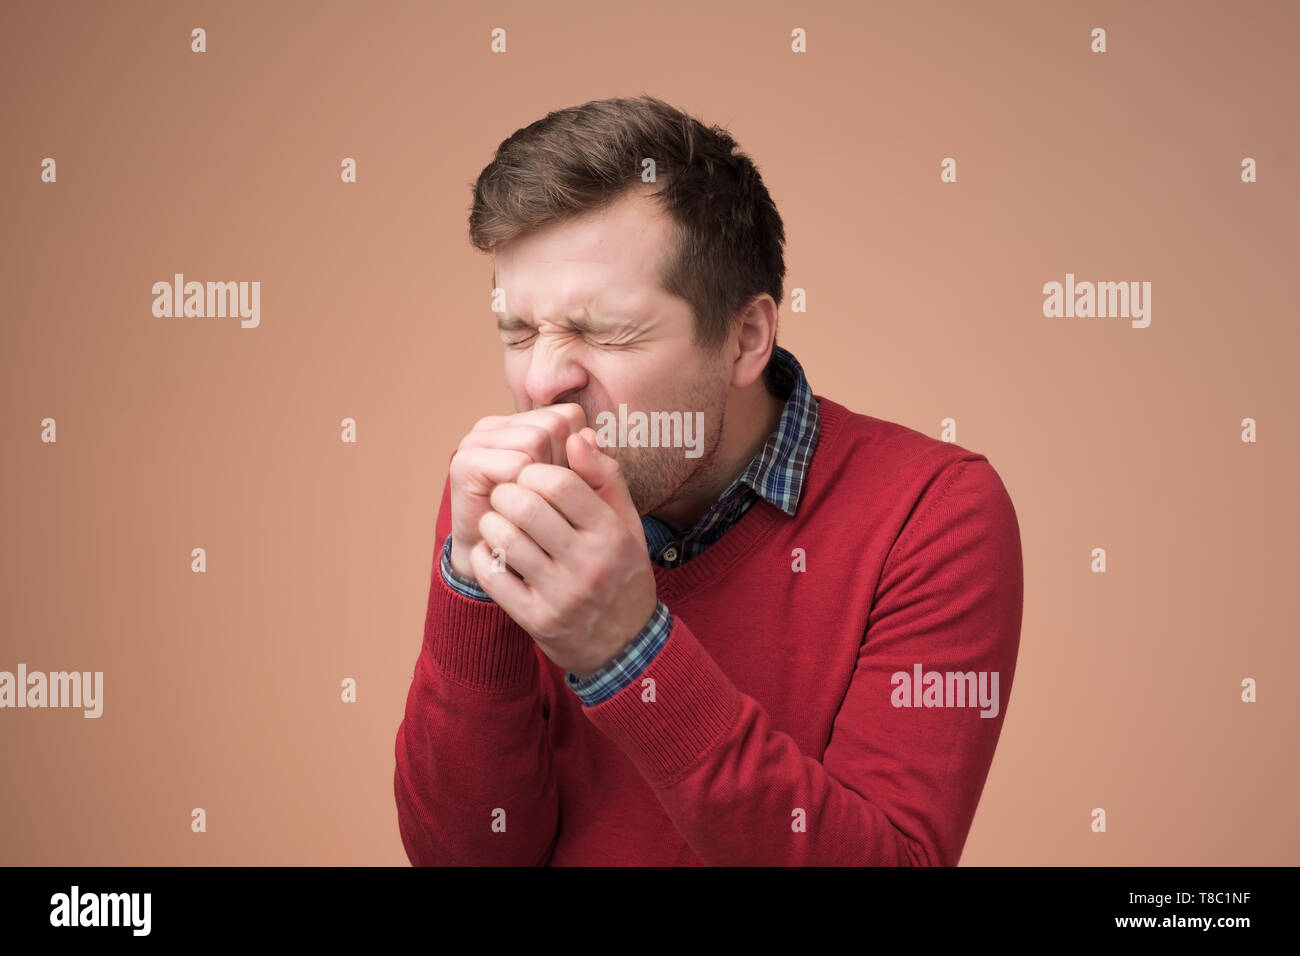 Handsome mature manin red sweater coughing a lot. Stock Photo